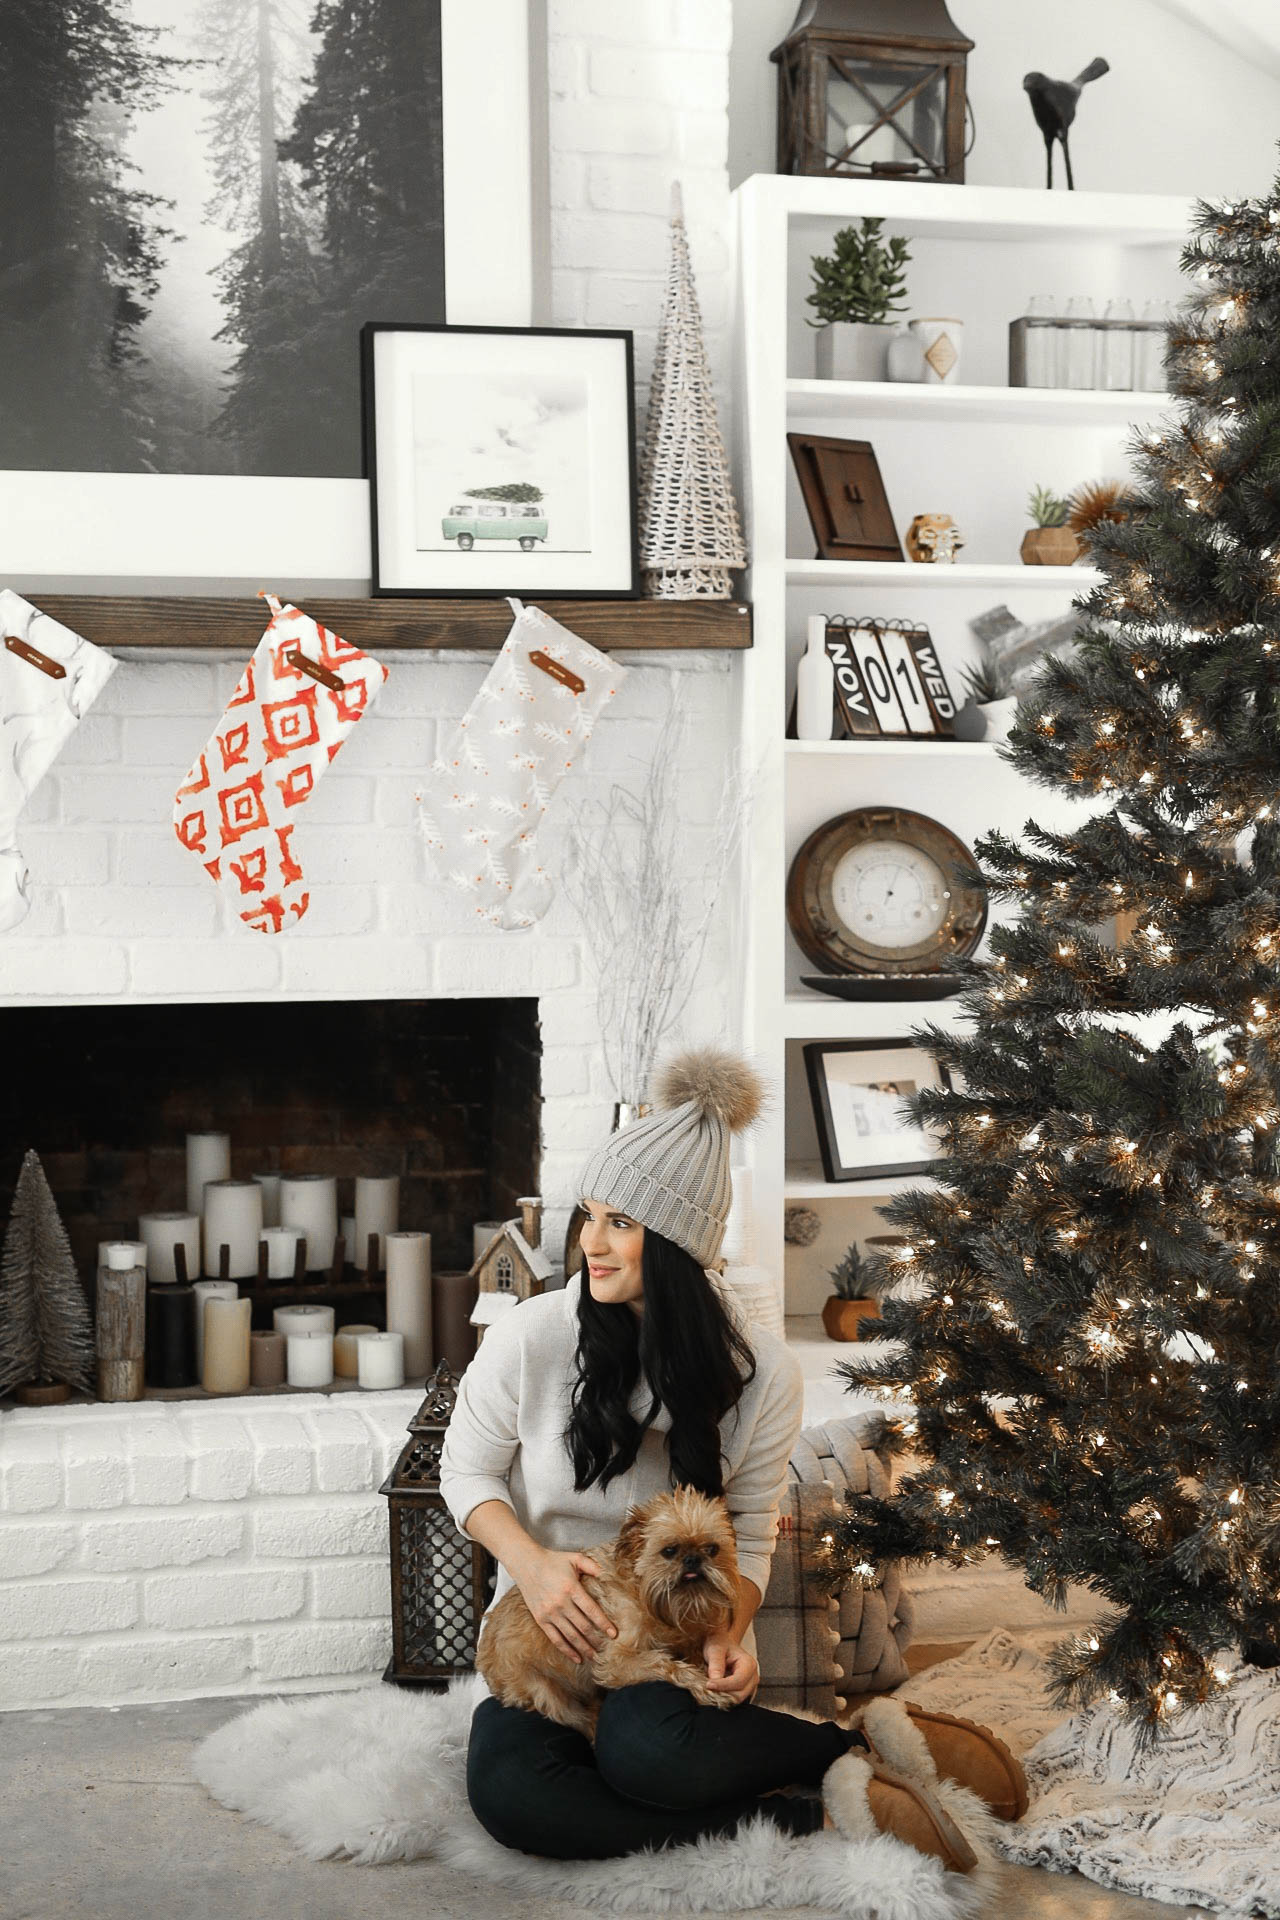 DTKAustin is sharing tips on how to pick the perfect wall art for large living spaces with Minted for the holidays.